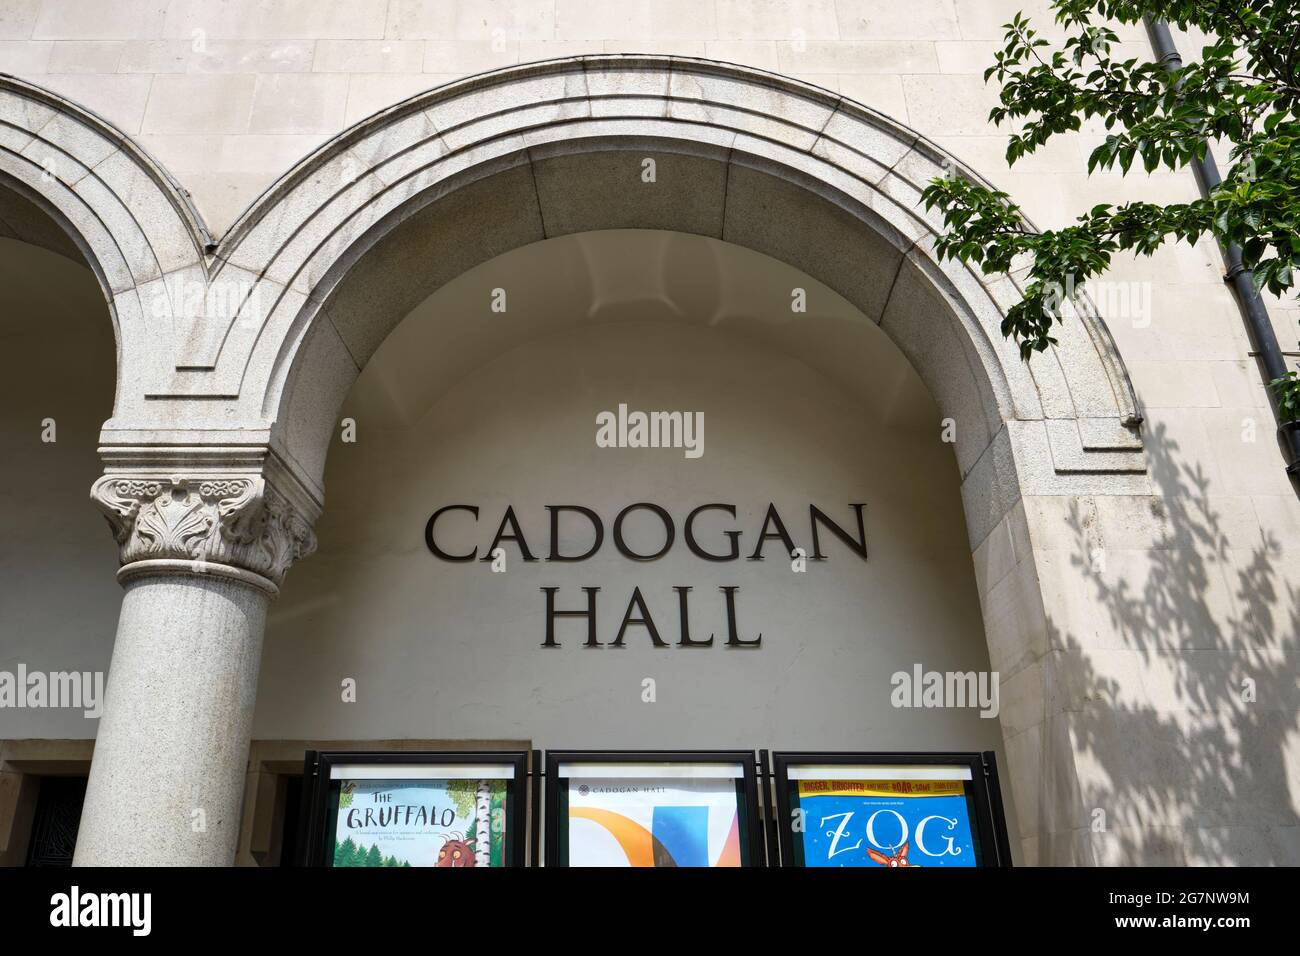 London  UK - 15 July 2021: Close-up of the facade of the Cadogan Hall. Stock Photo